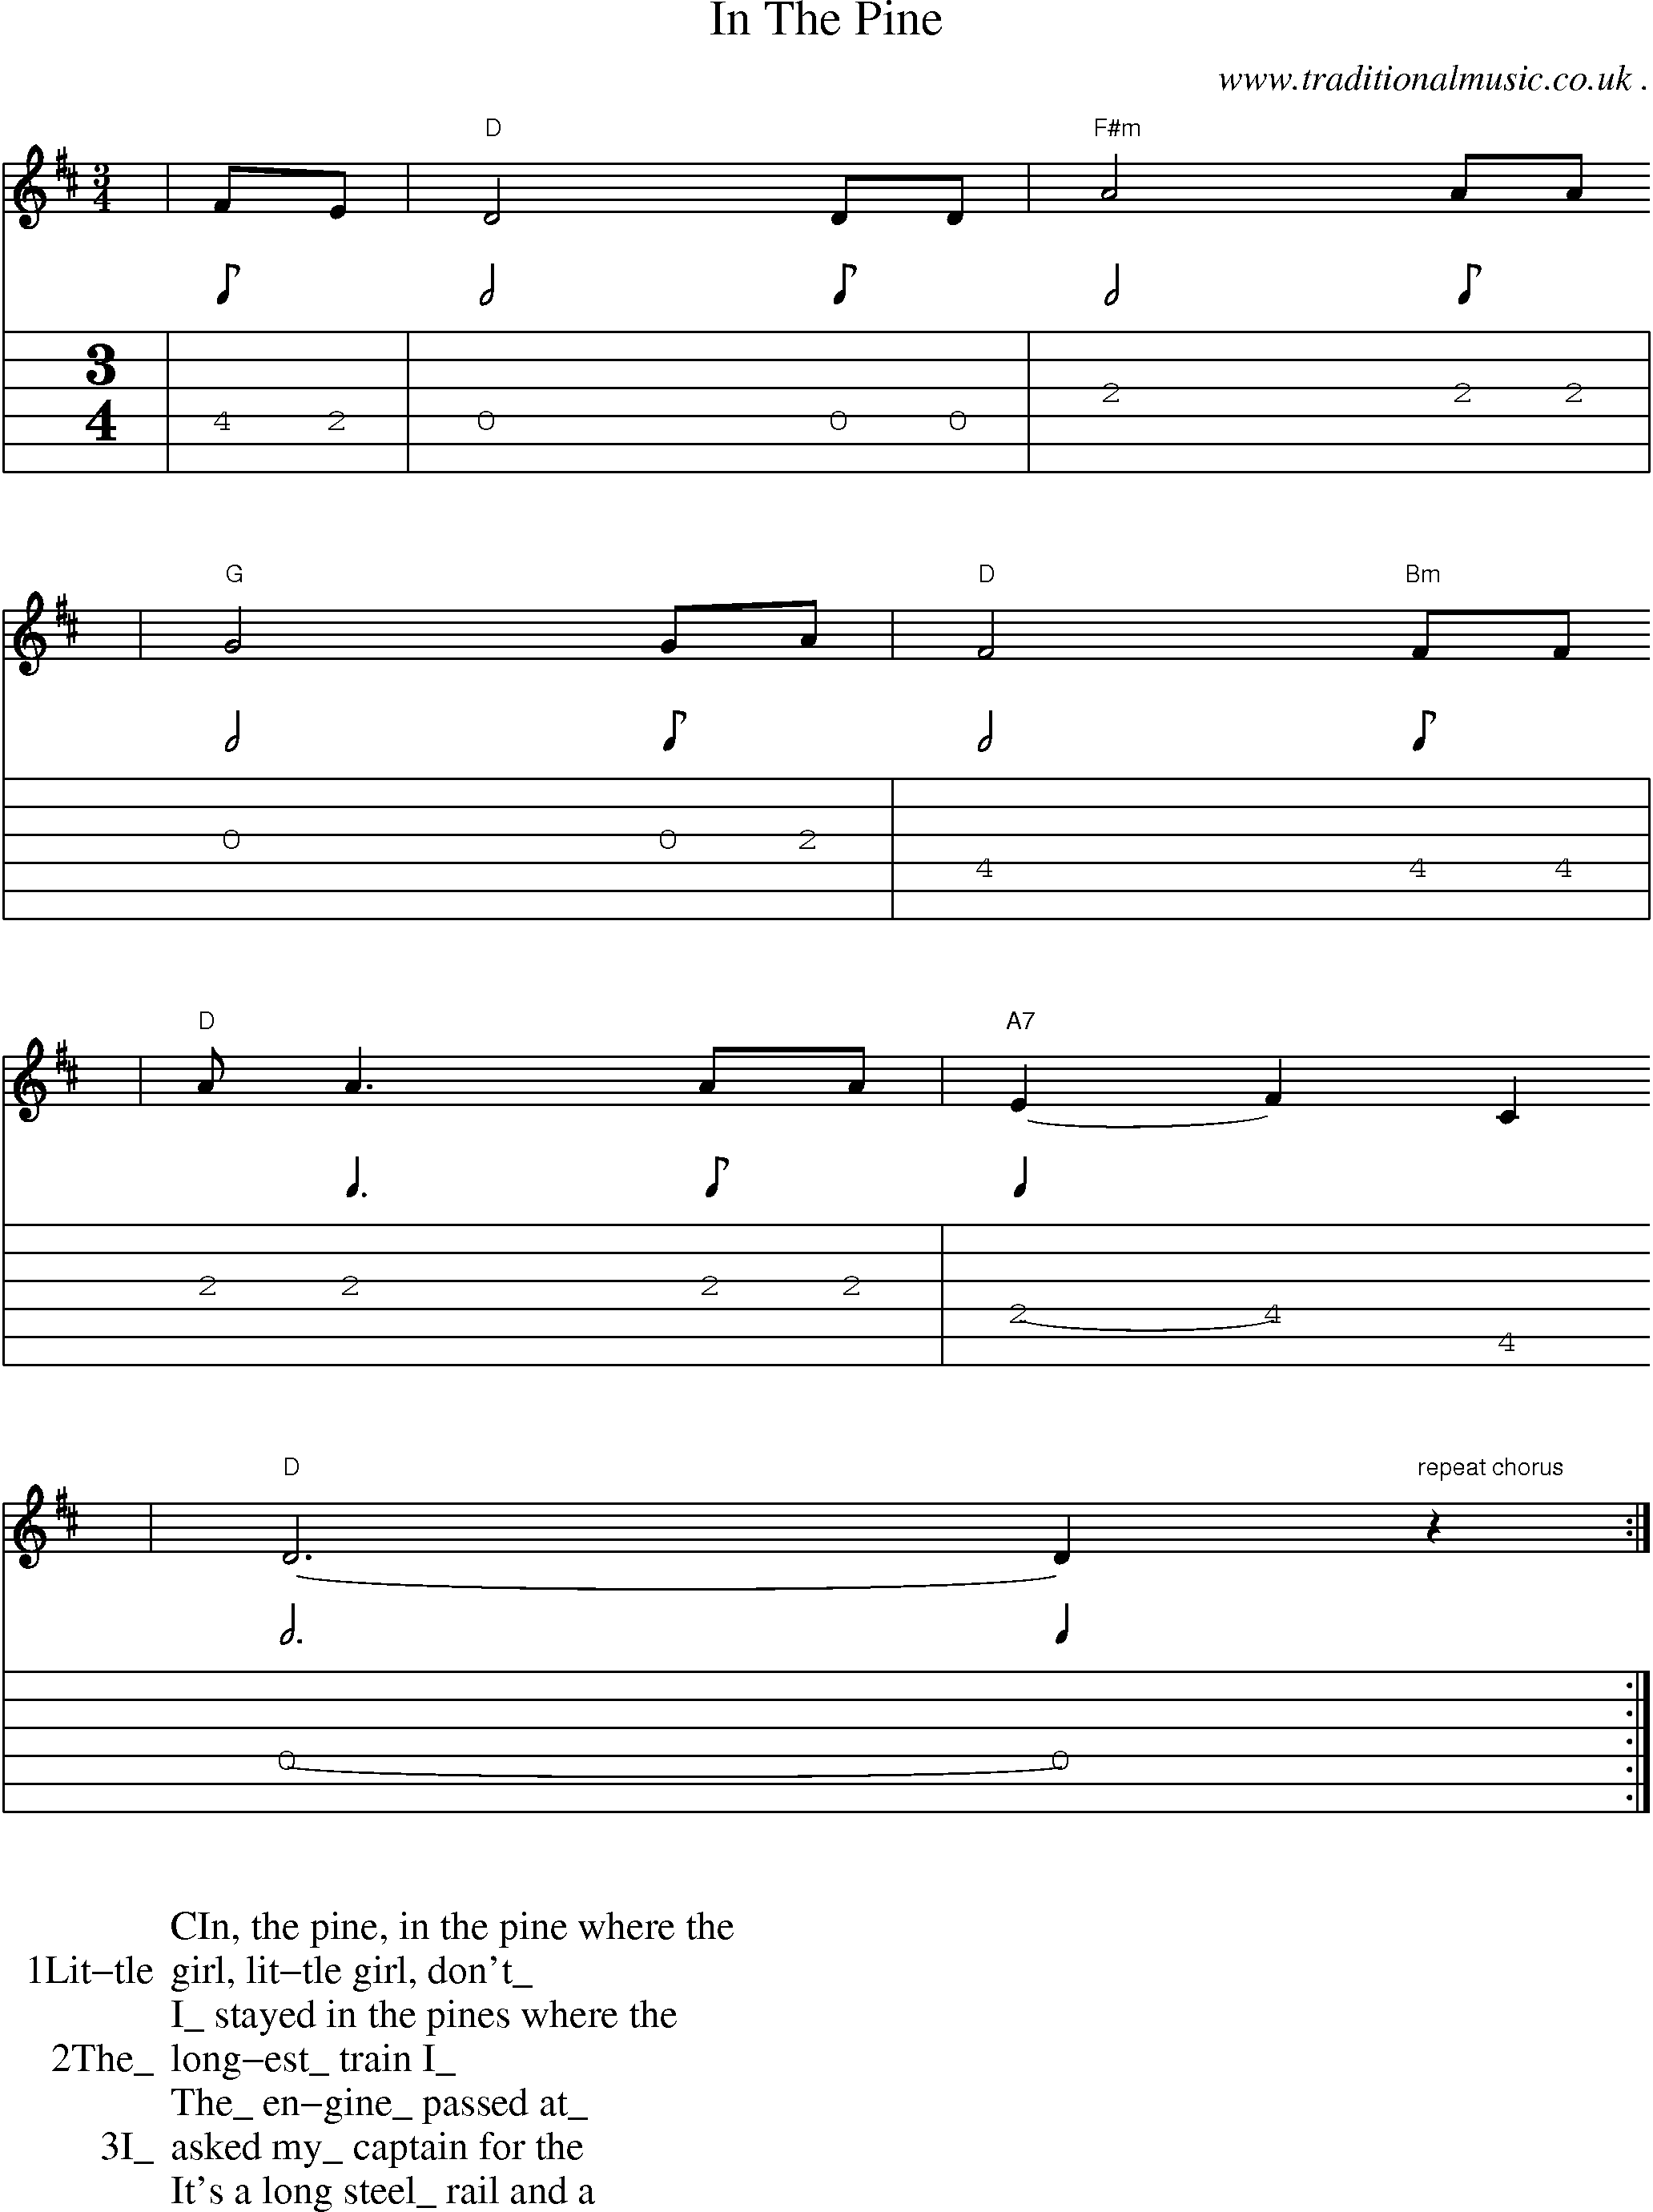 Music Score and Guitar Tabs for In The Pine